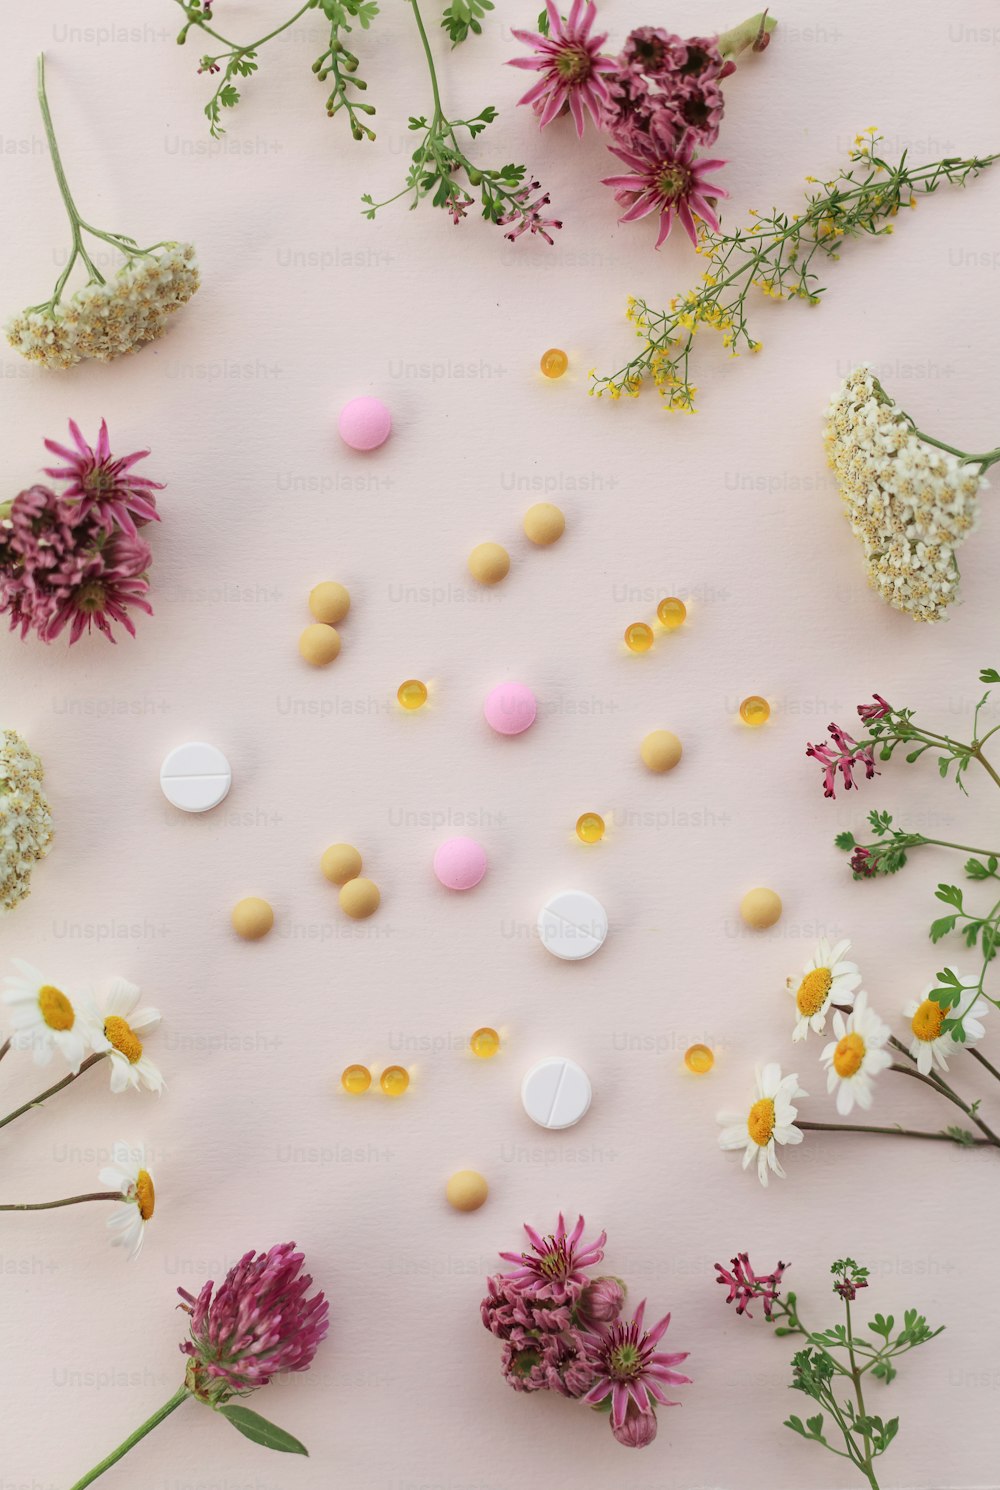 flowers and pills arranged in a circle on a pink surface